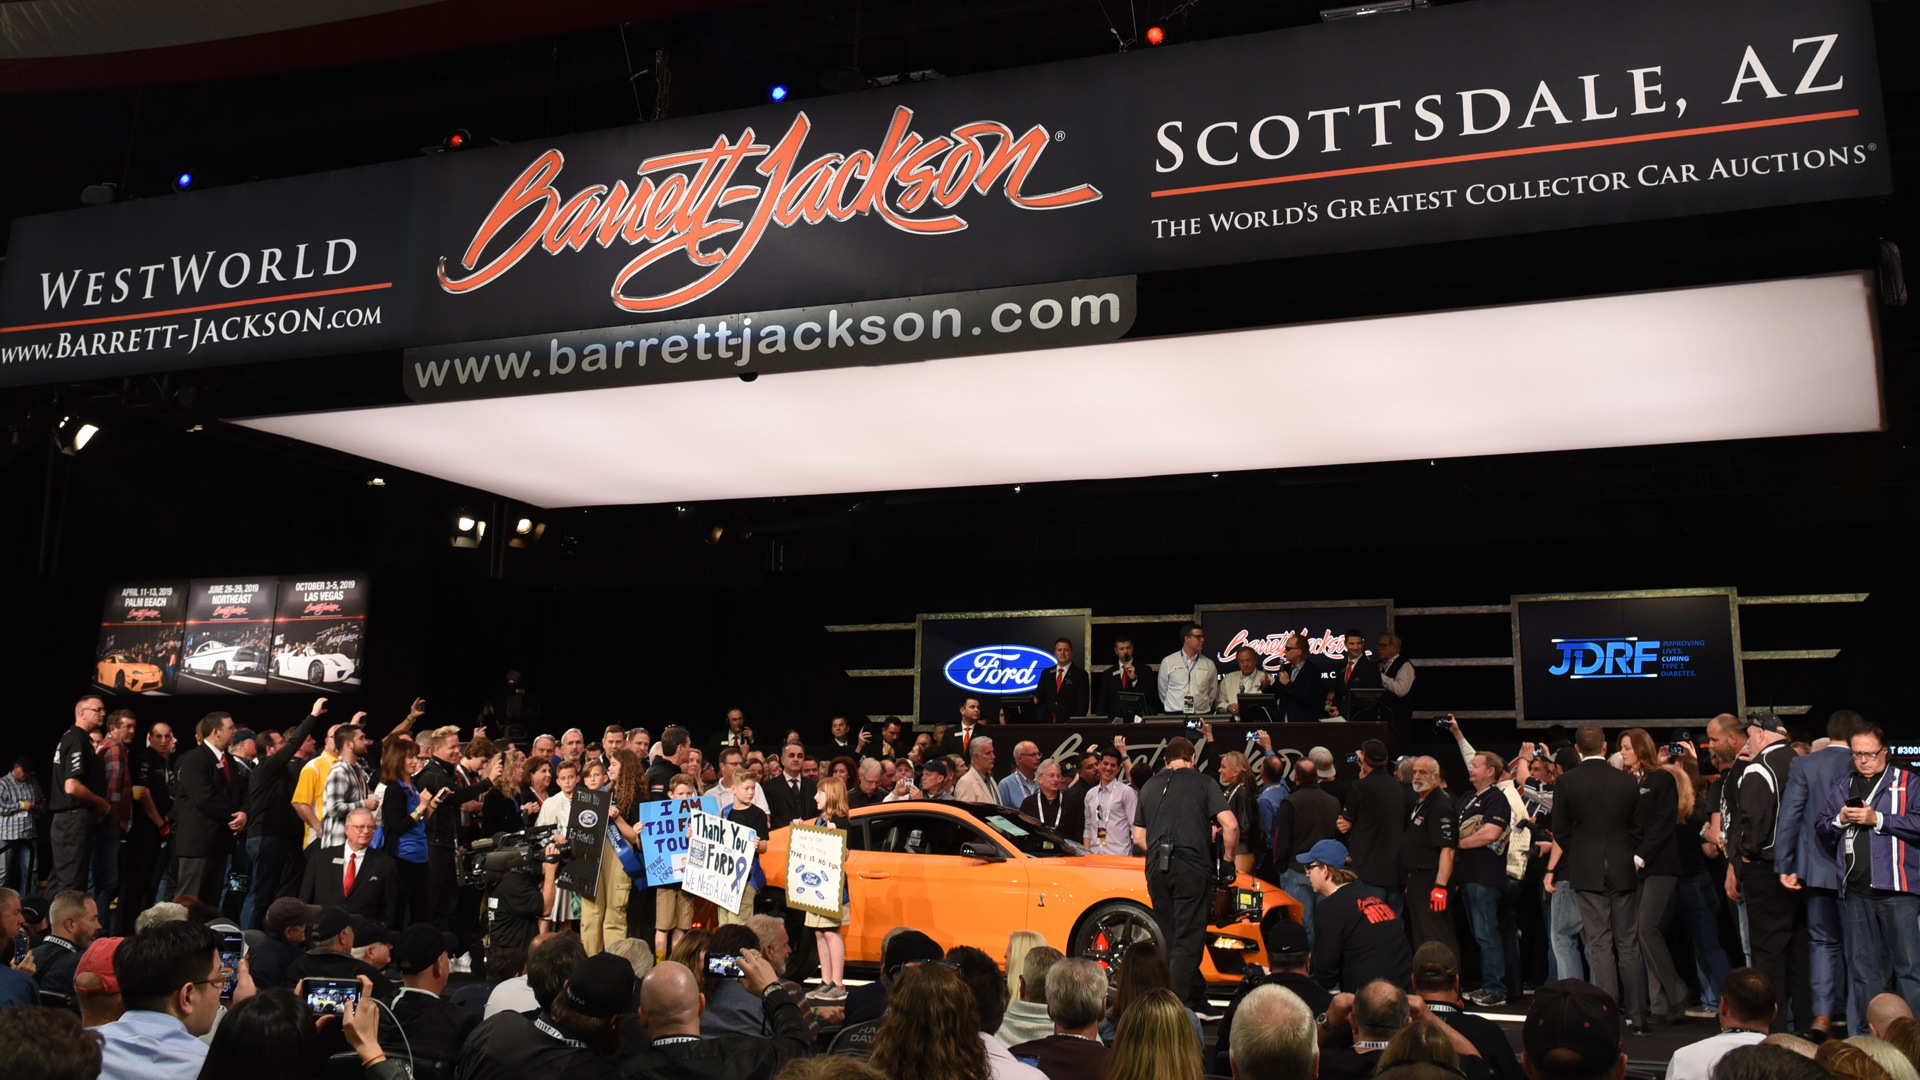 Auction of 2020 Ford Mustang Shelby GT500 with VIN ending in 001 on January 18, 2019